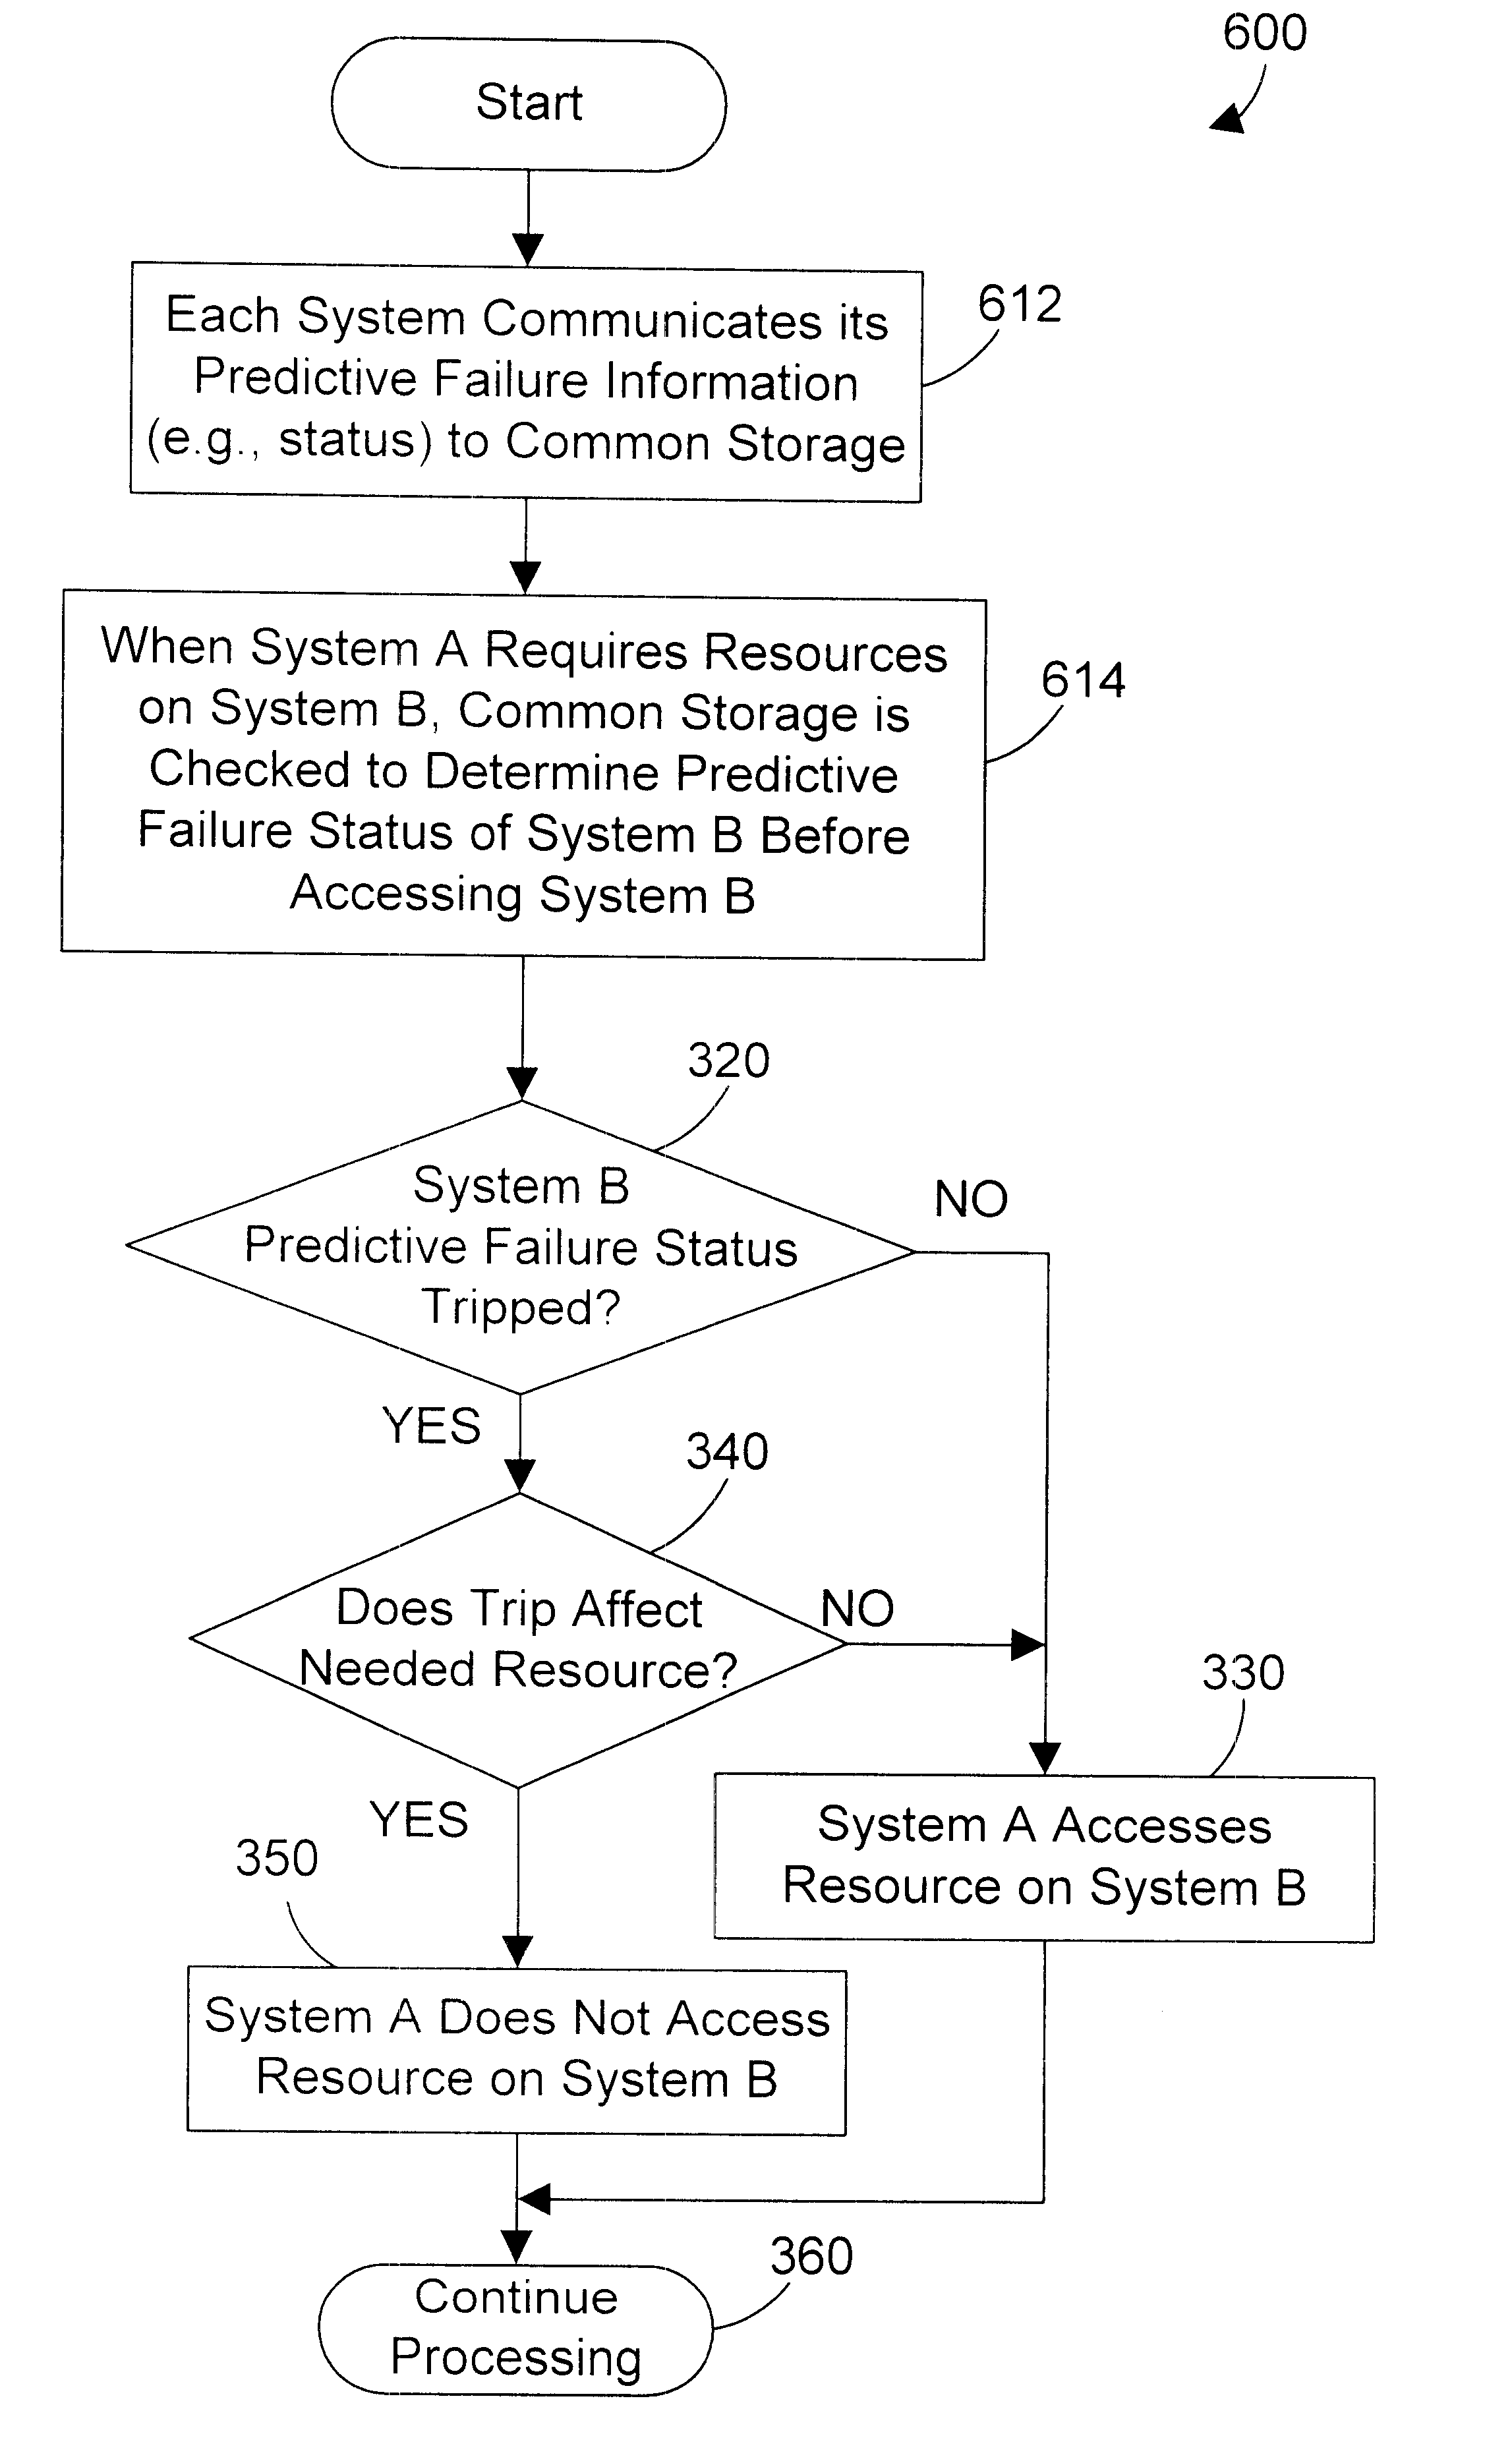 Apparatus and method for sharing predictive failure information on a computer network